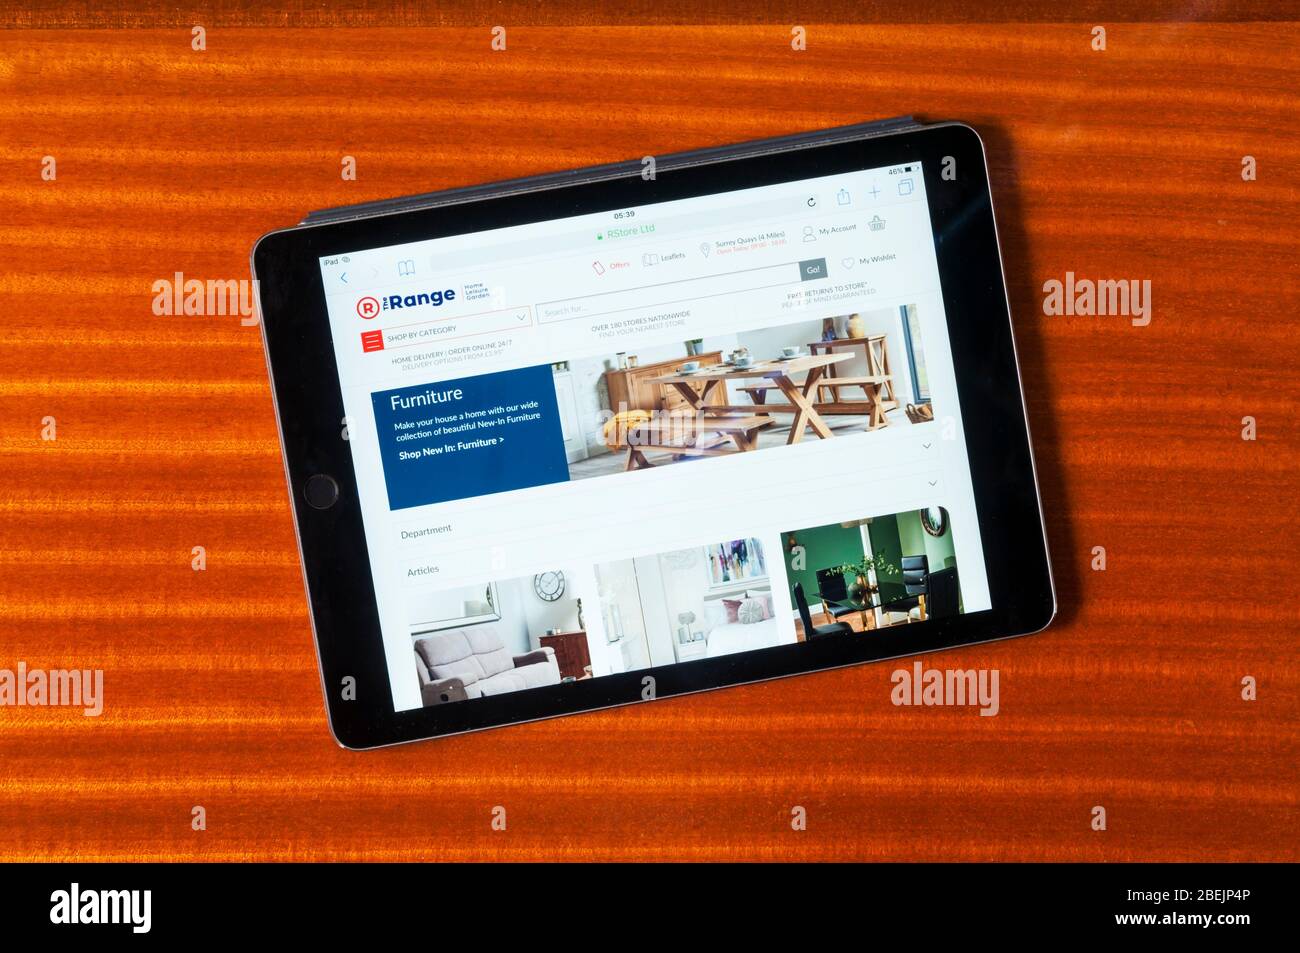 The website of The Range furniture sellers displayed on an iPad tablet computer against a polished wood background. Stock Photo